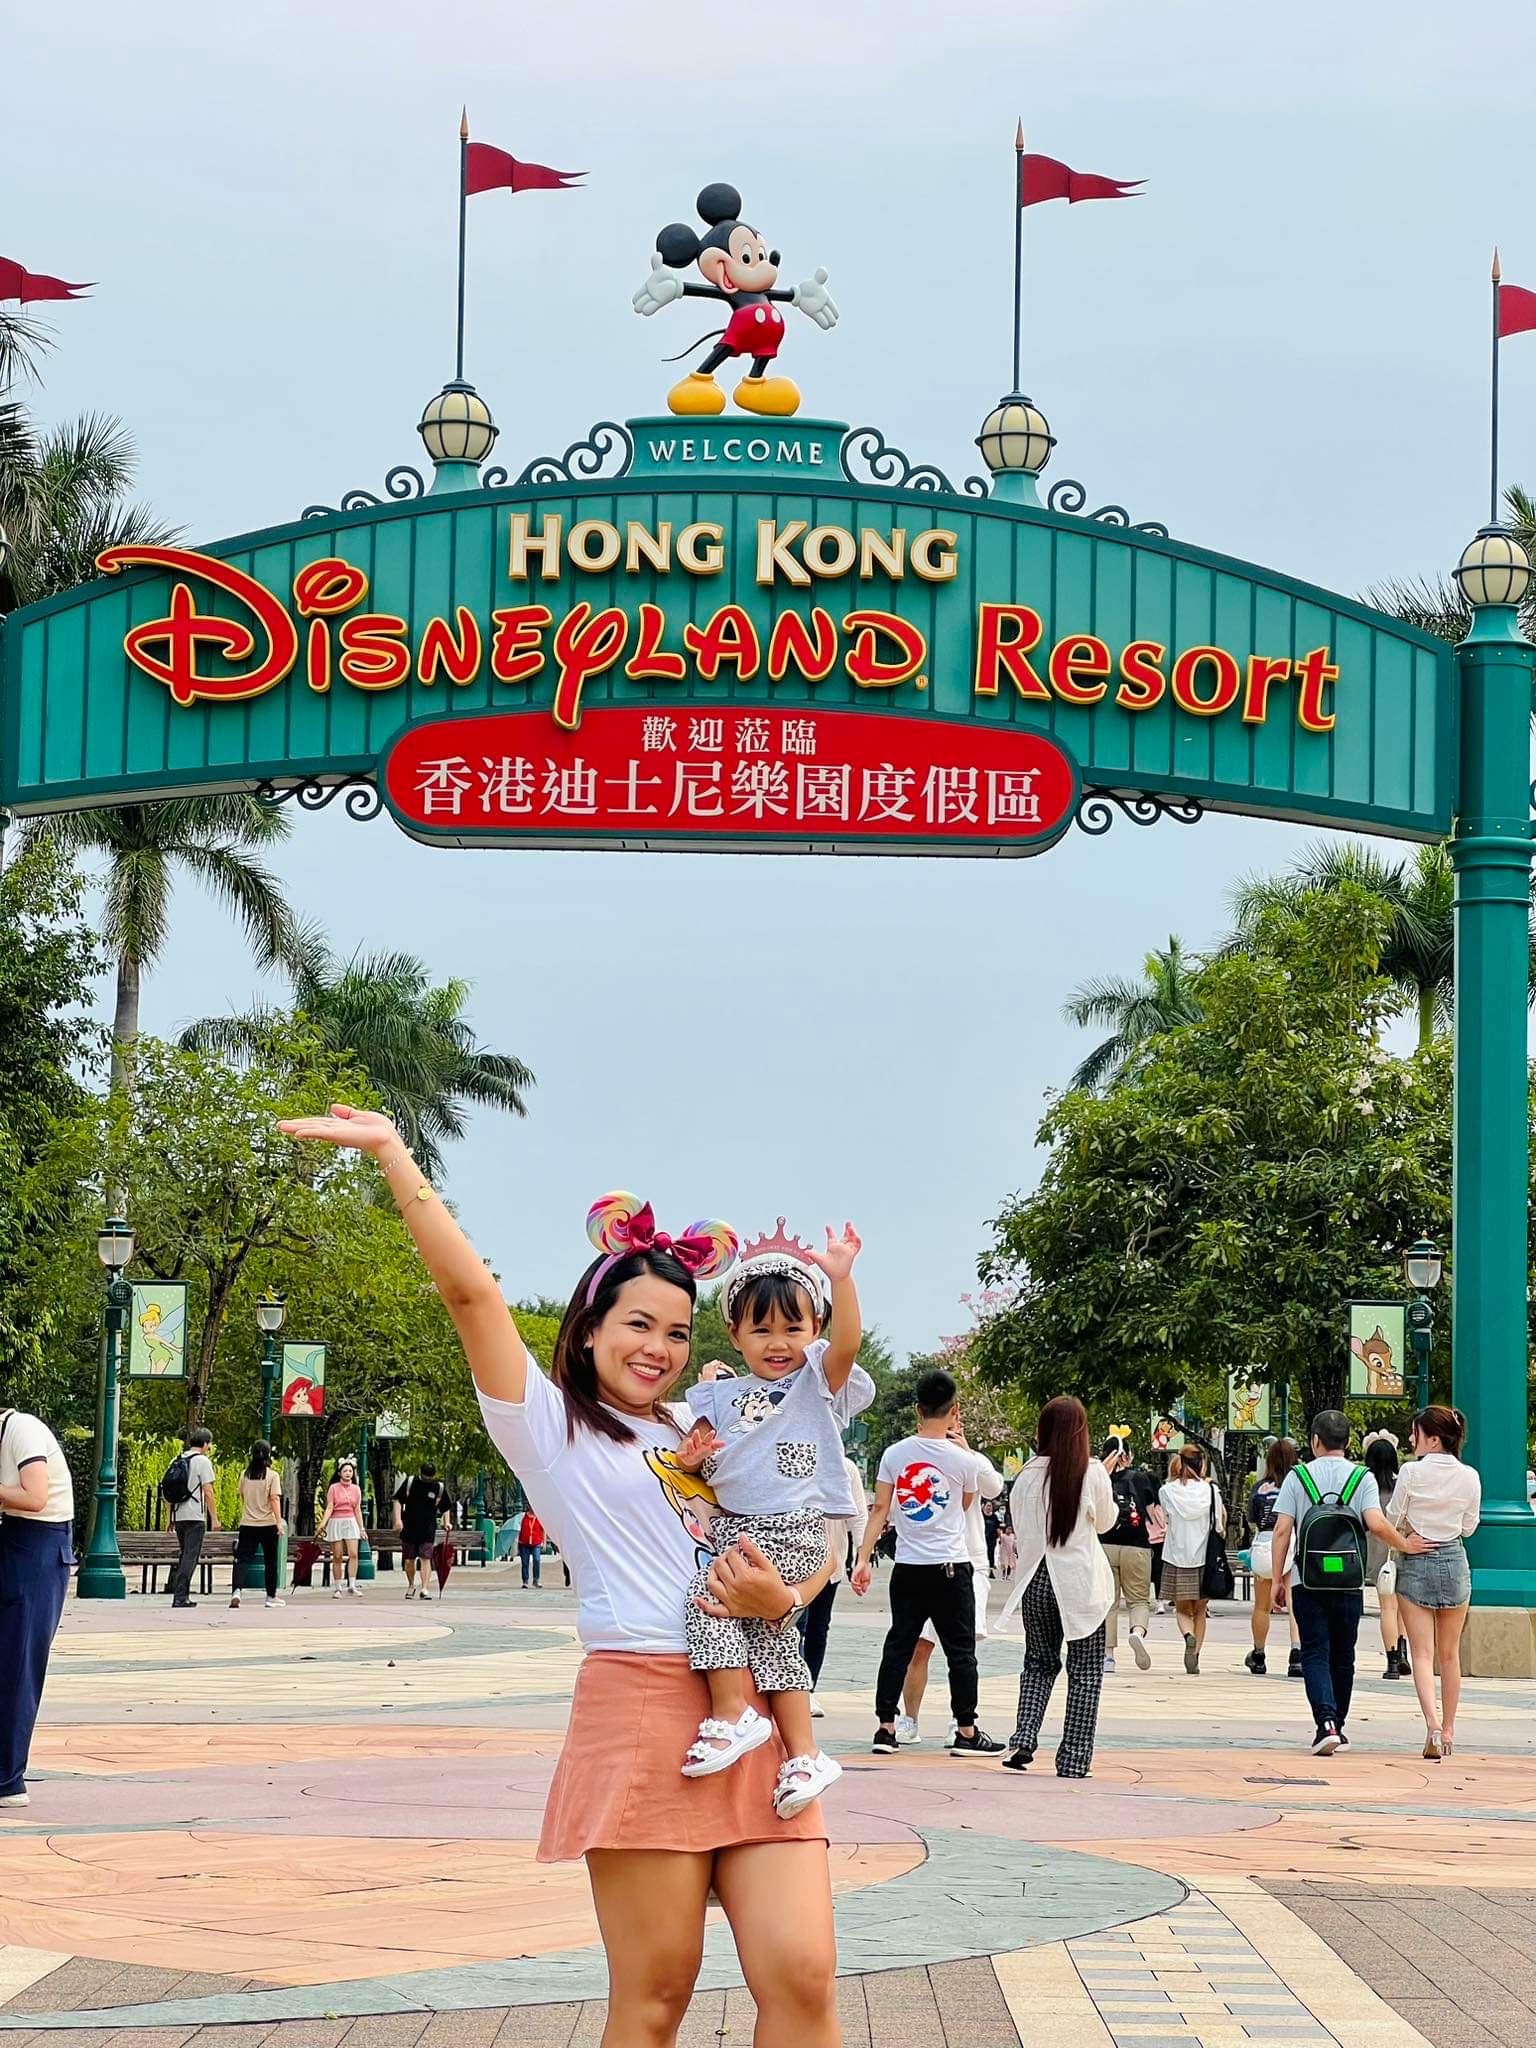 Leovy holds her daughter as they both raise their hands in excitement in front of the Hong Kong Disneyland Resort main entrance sign